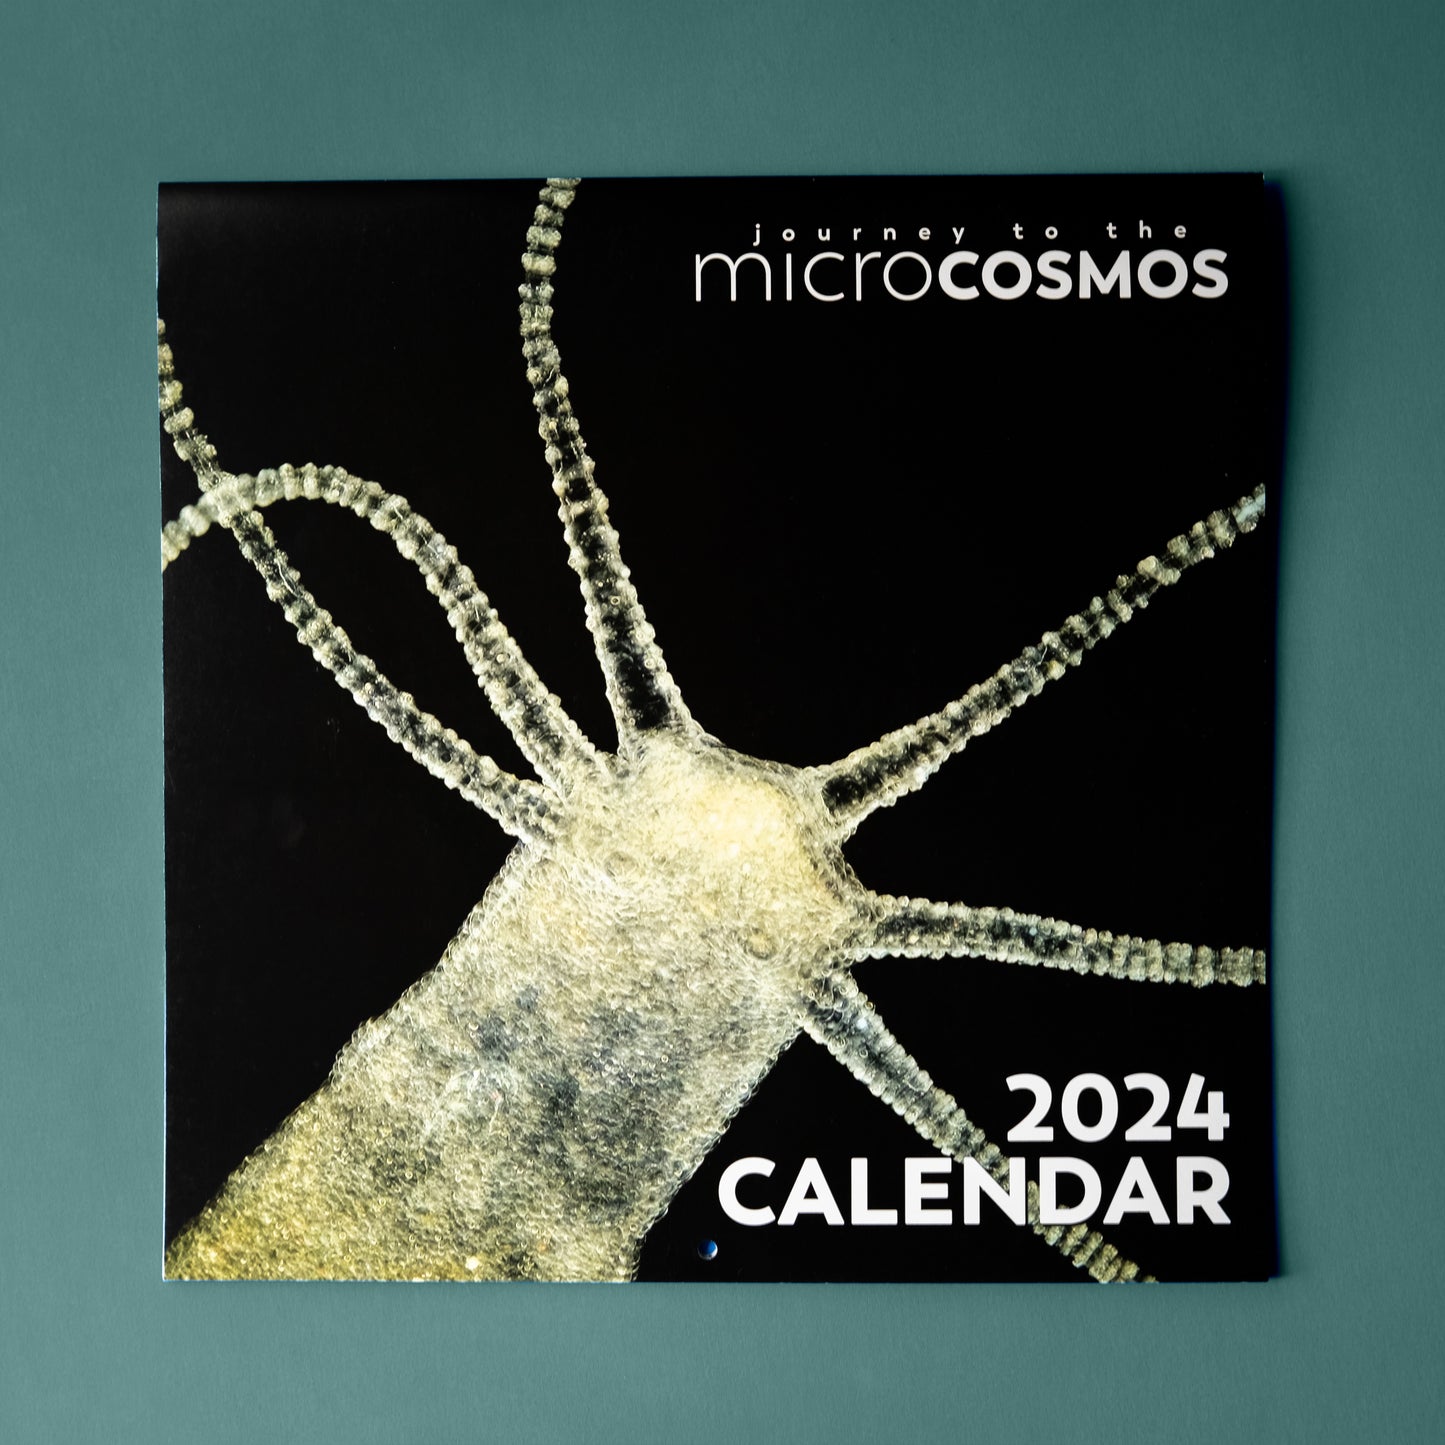 The cover of the Journey To The Microcosmos 2024 calendar, featuring a Hydra